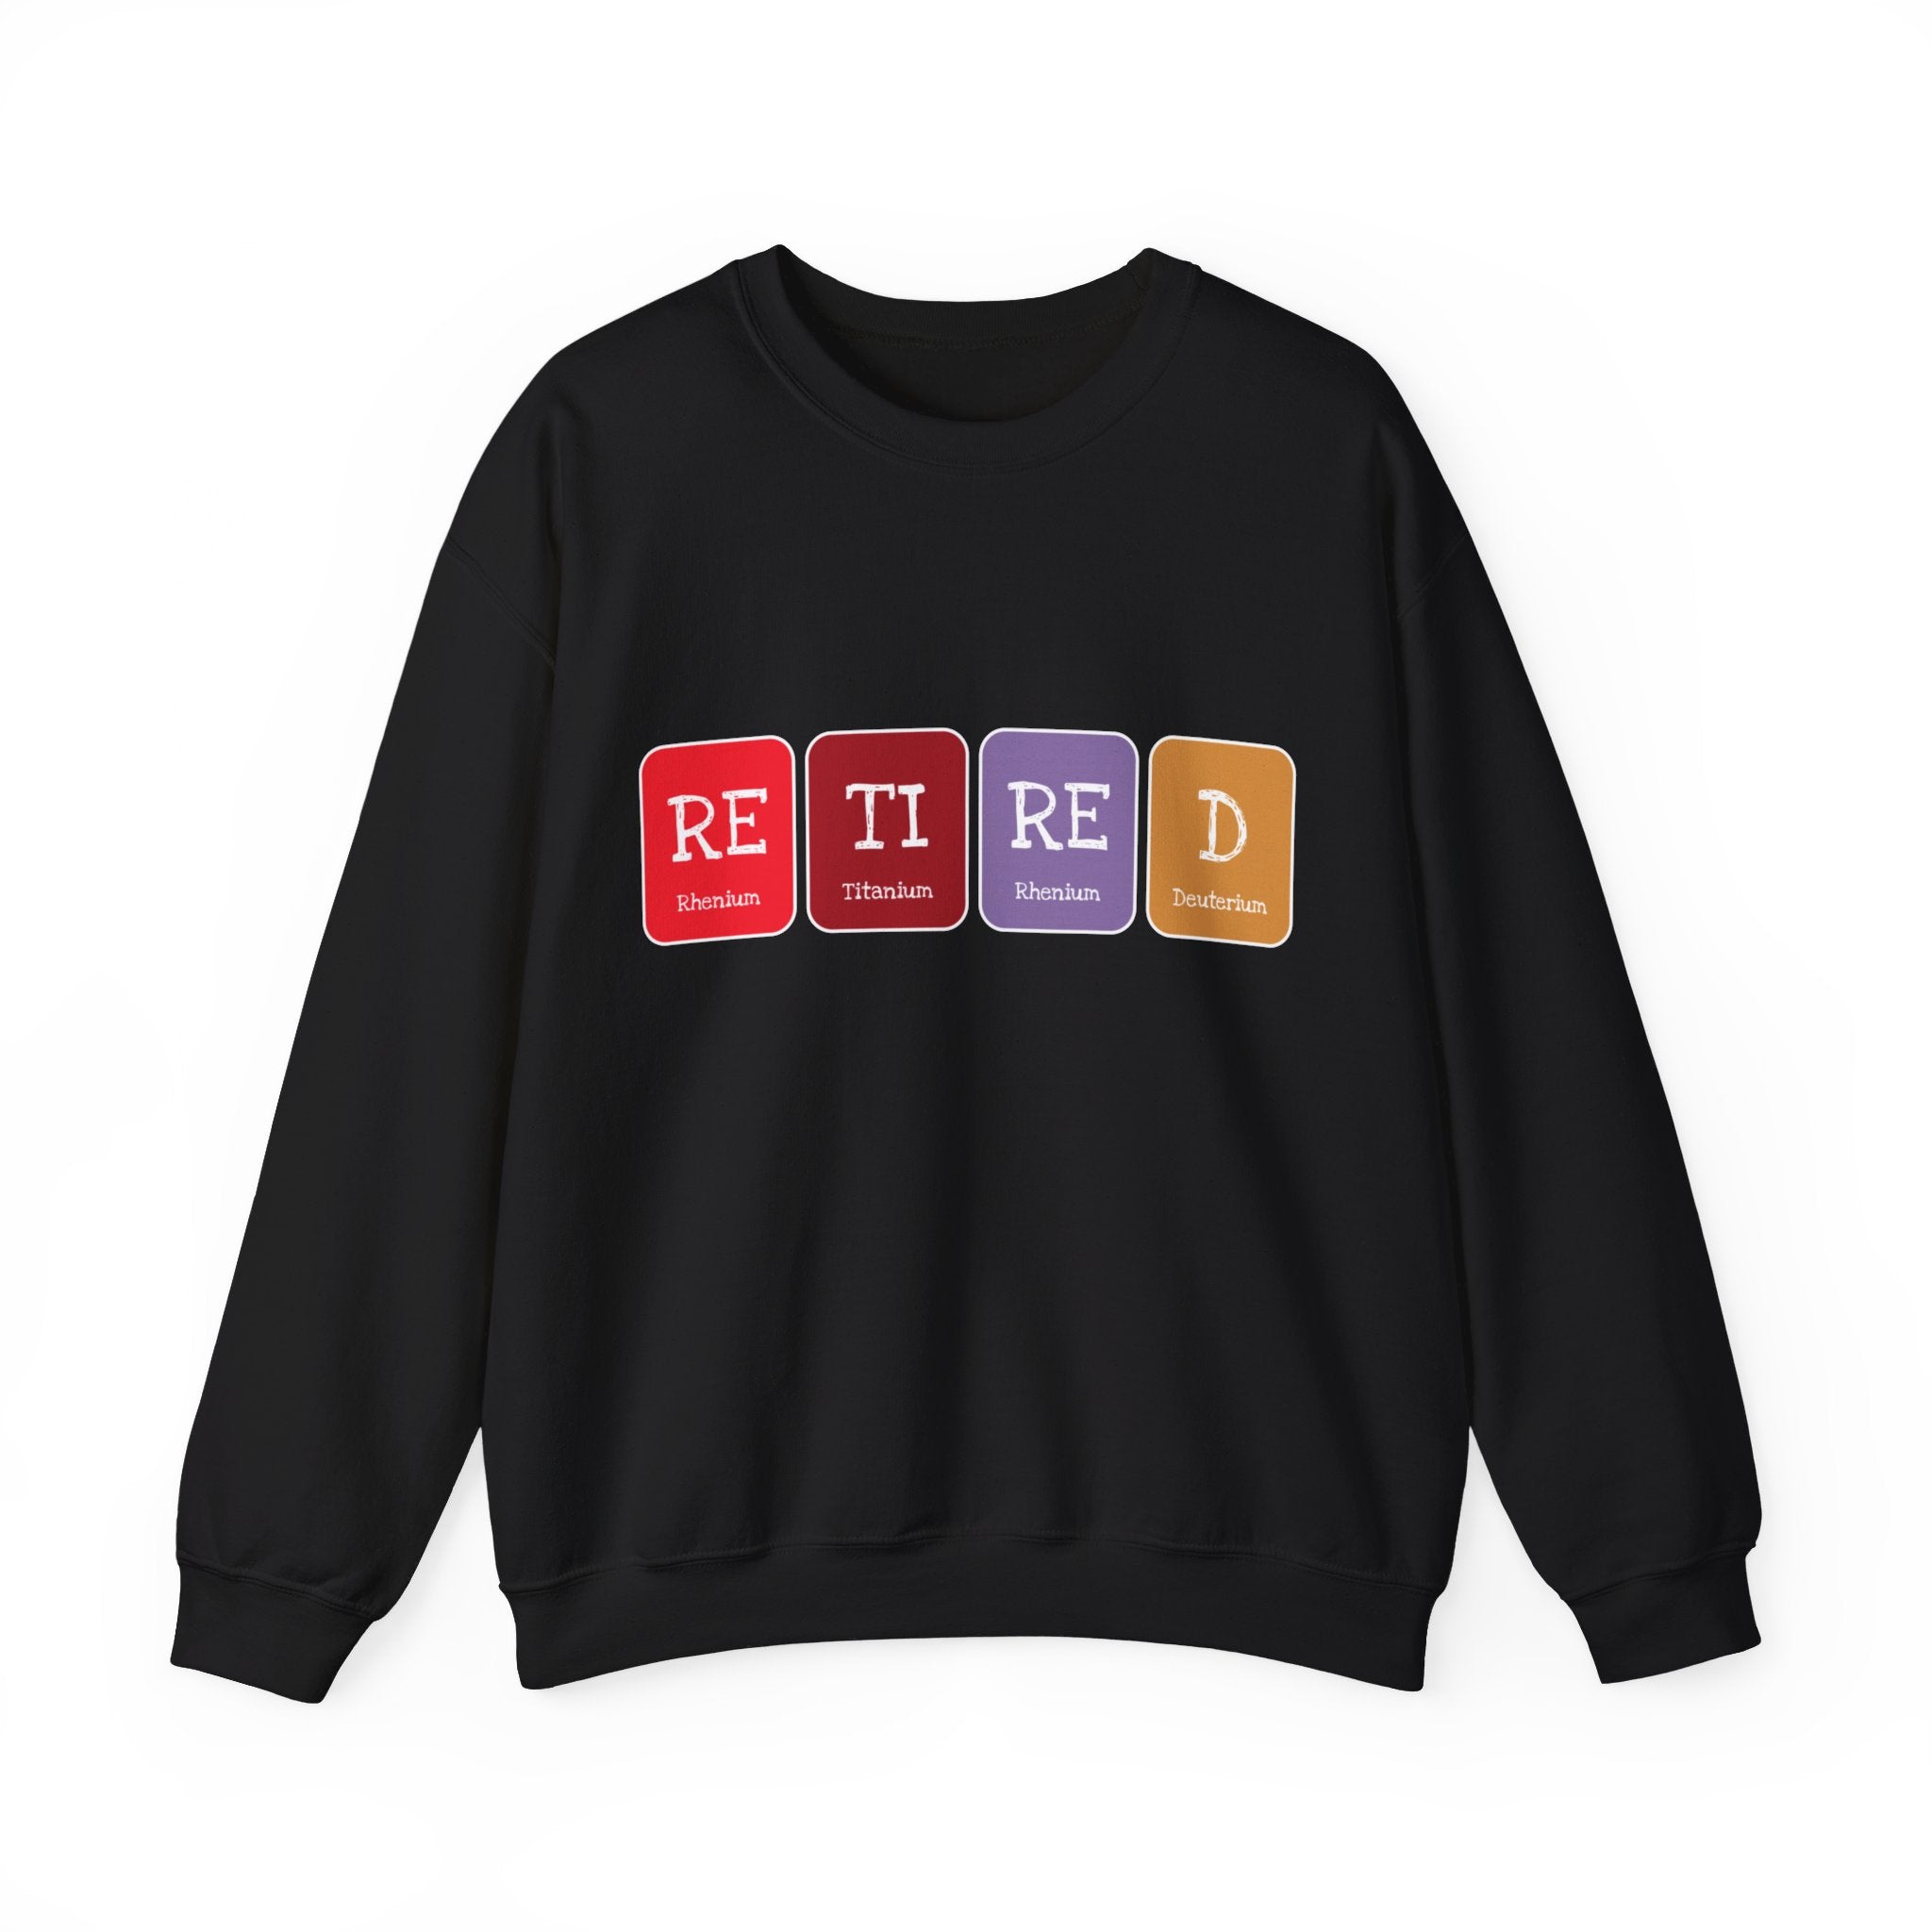 Black sweatshirt with the word "RETIRED" across the front, each letter on a colored block resembling Scrabble tiles. This Retired - Sweatshirt combines comfort and fashion effortlessly.